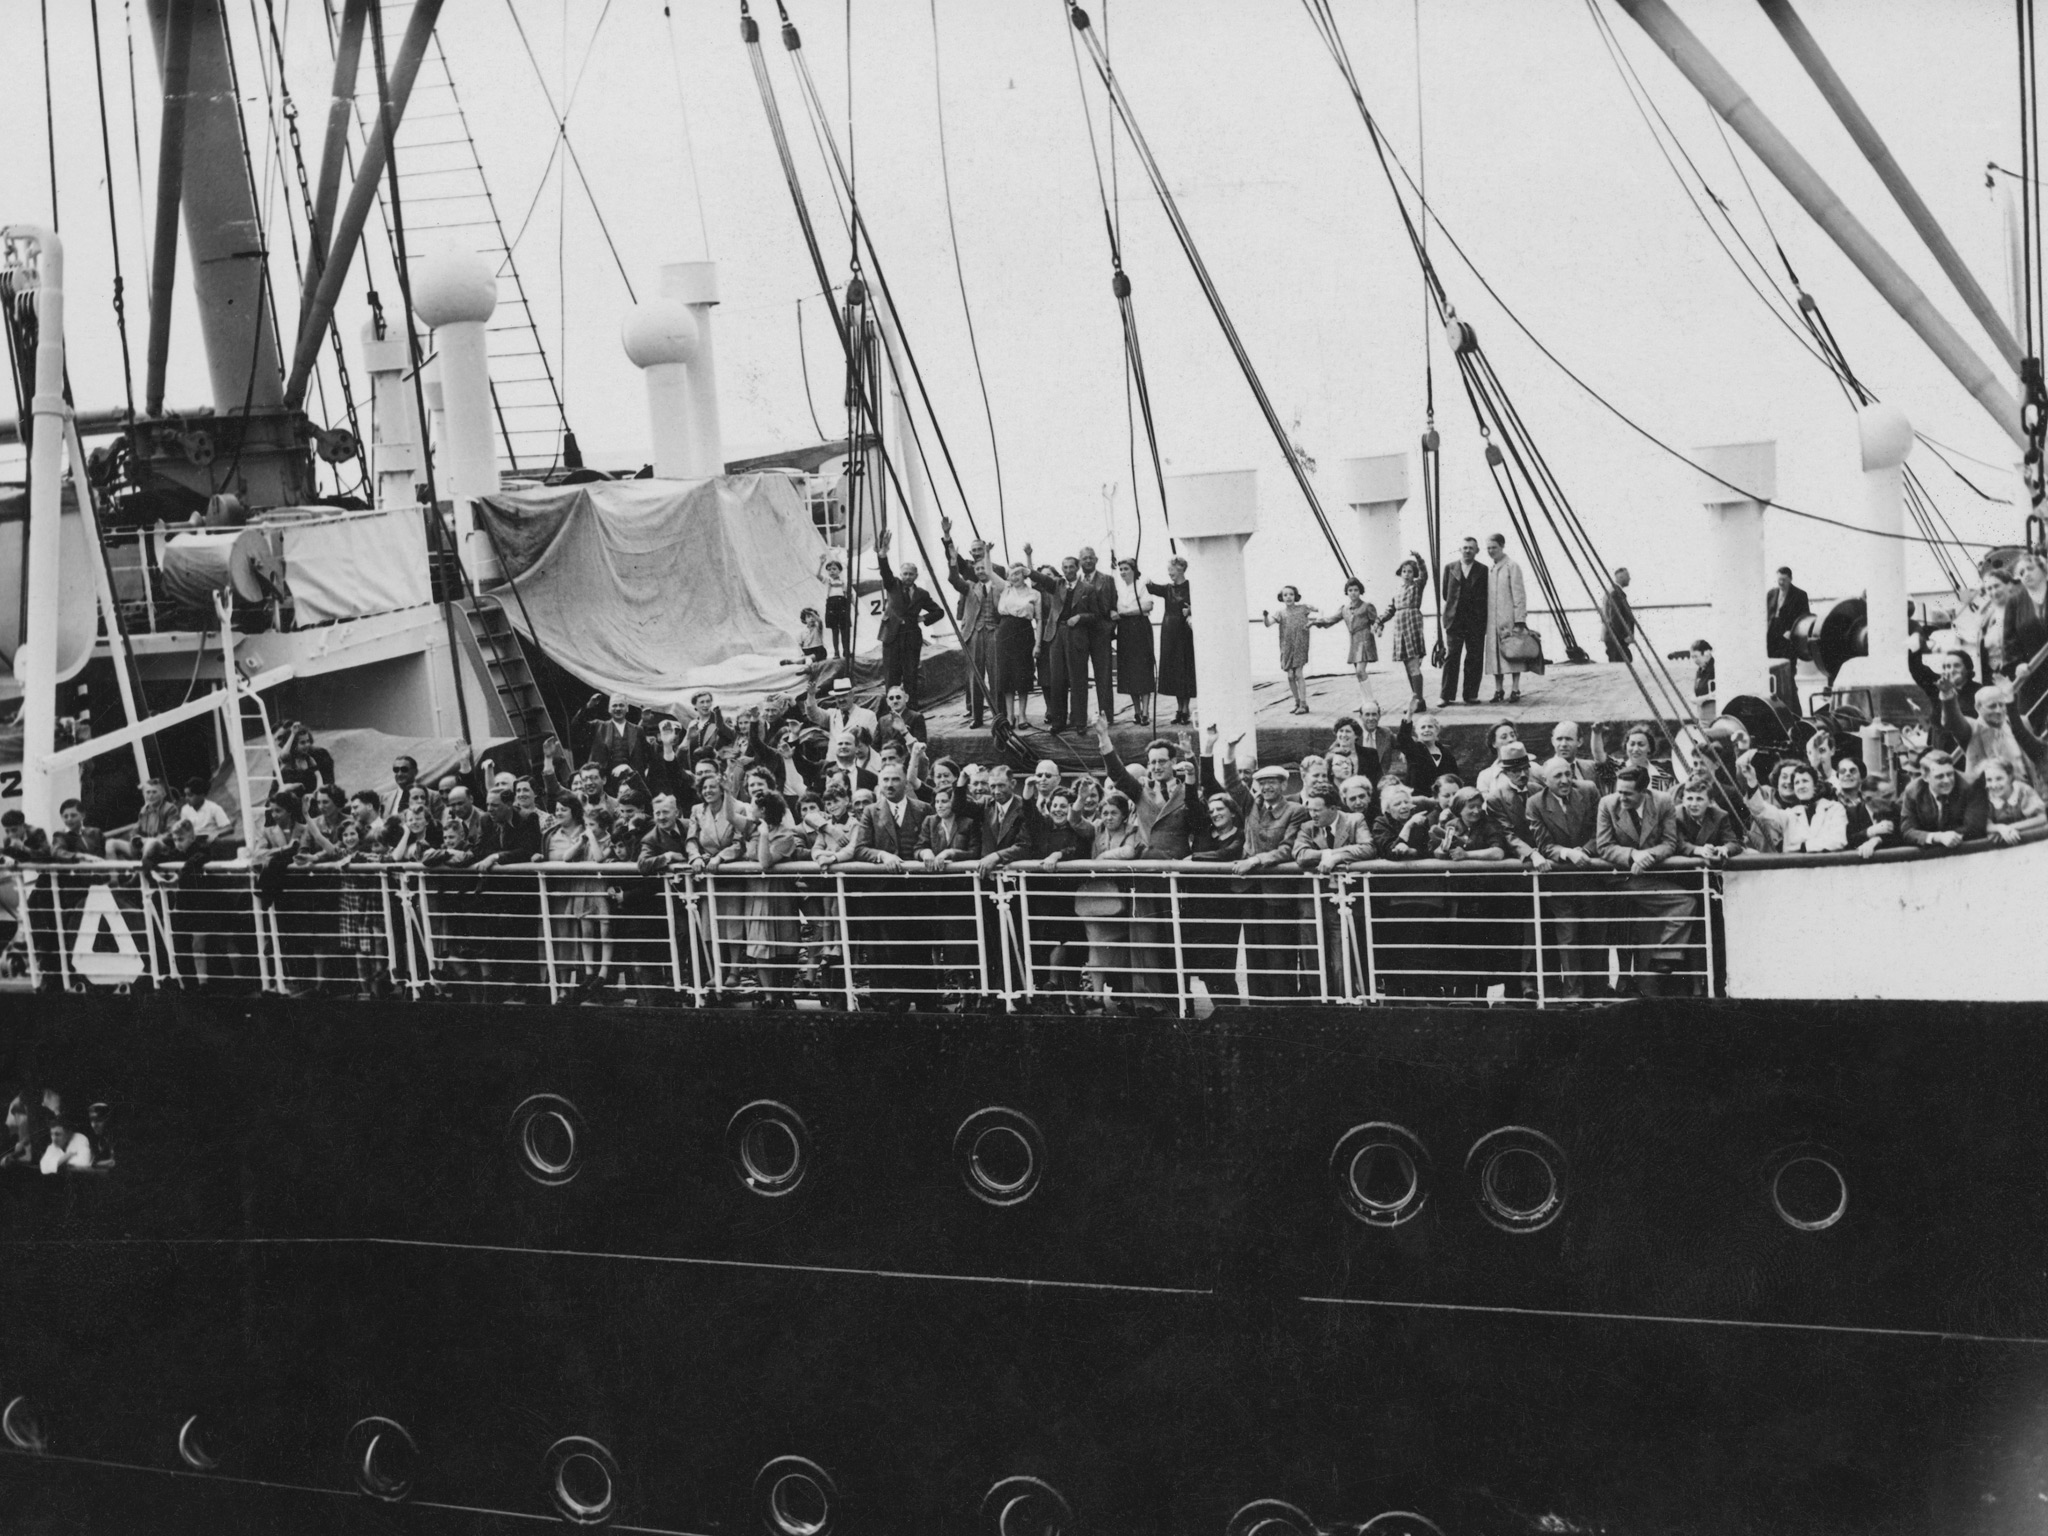 The MS St. Louis when it arrived in Antwerp in 1939. This was a German ocean liner carrying around 900 Jewish refugees. The German captain and his crew got them out of Germany. They first tried to seek asylum in Cuba, but were denied. Then they tried the US and Canada, but both denied them as well. Luckily Belgium, The Netherlands, France and the UK accepted them. However, since 3 of those countries were conquered by the Nazi's, over a quarter of these Jews were shipped to camps and died.